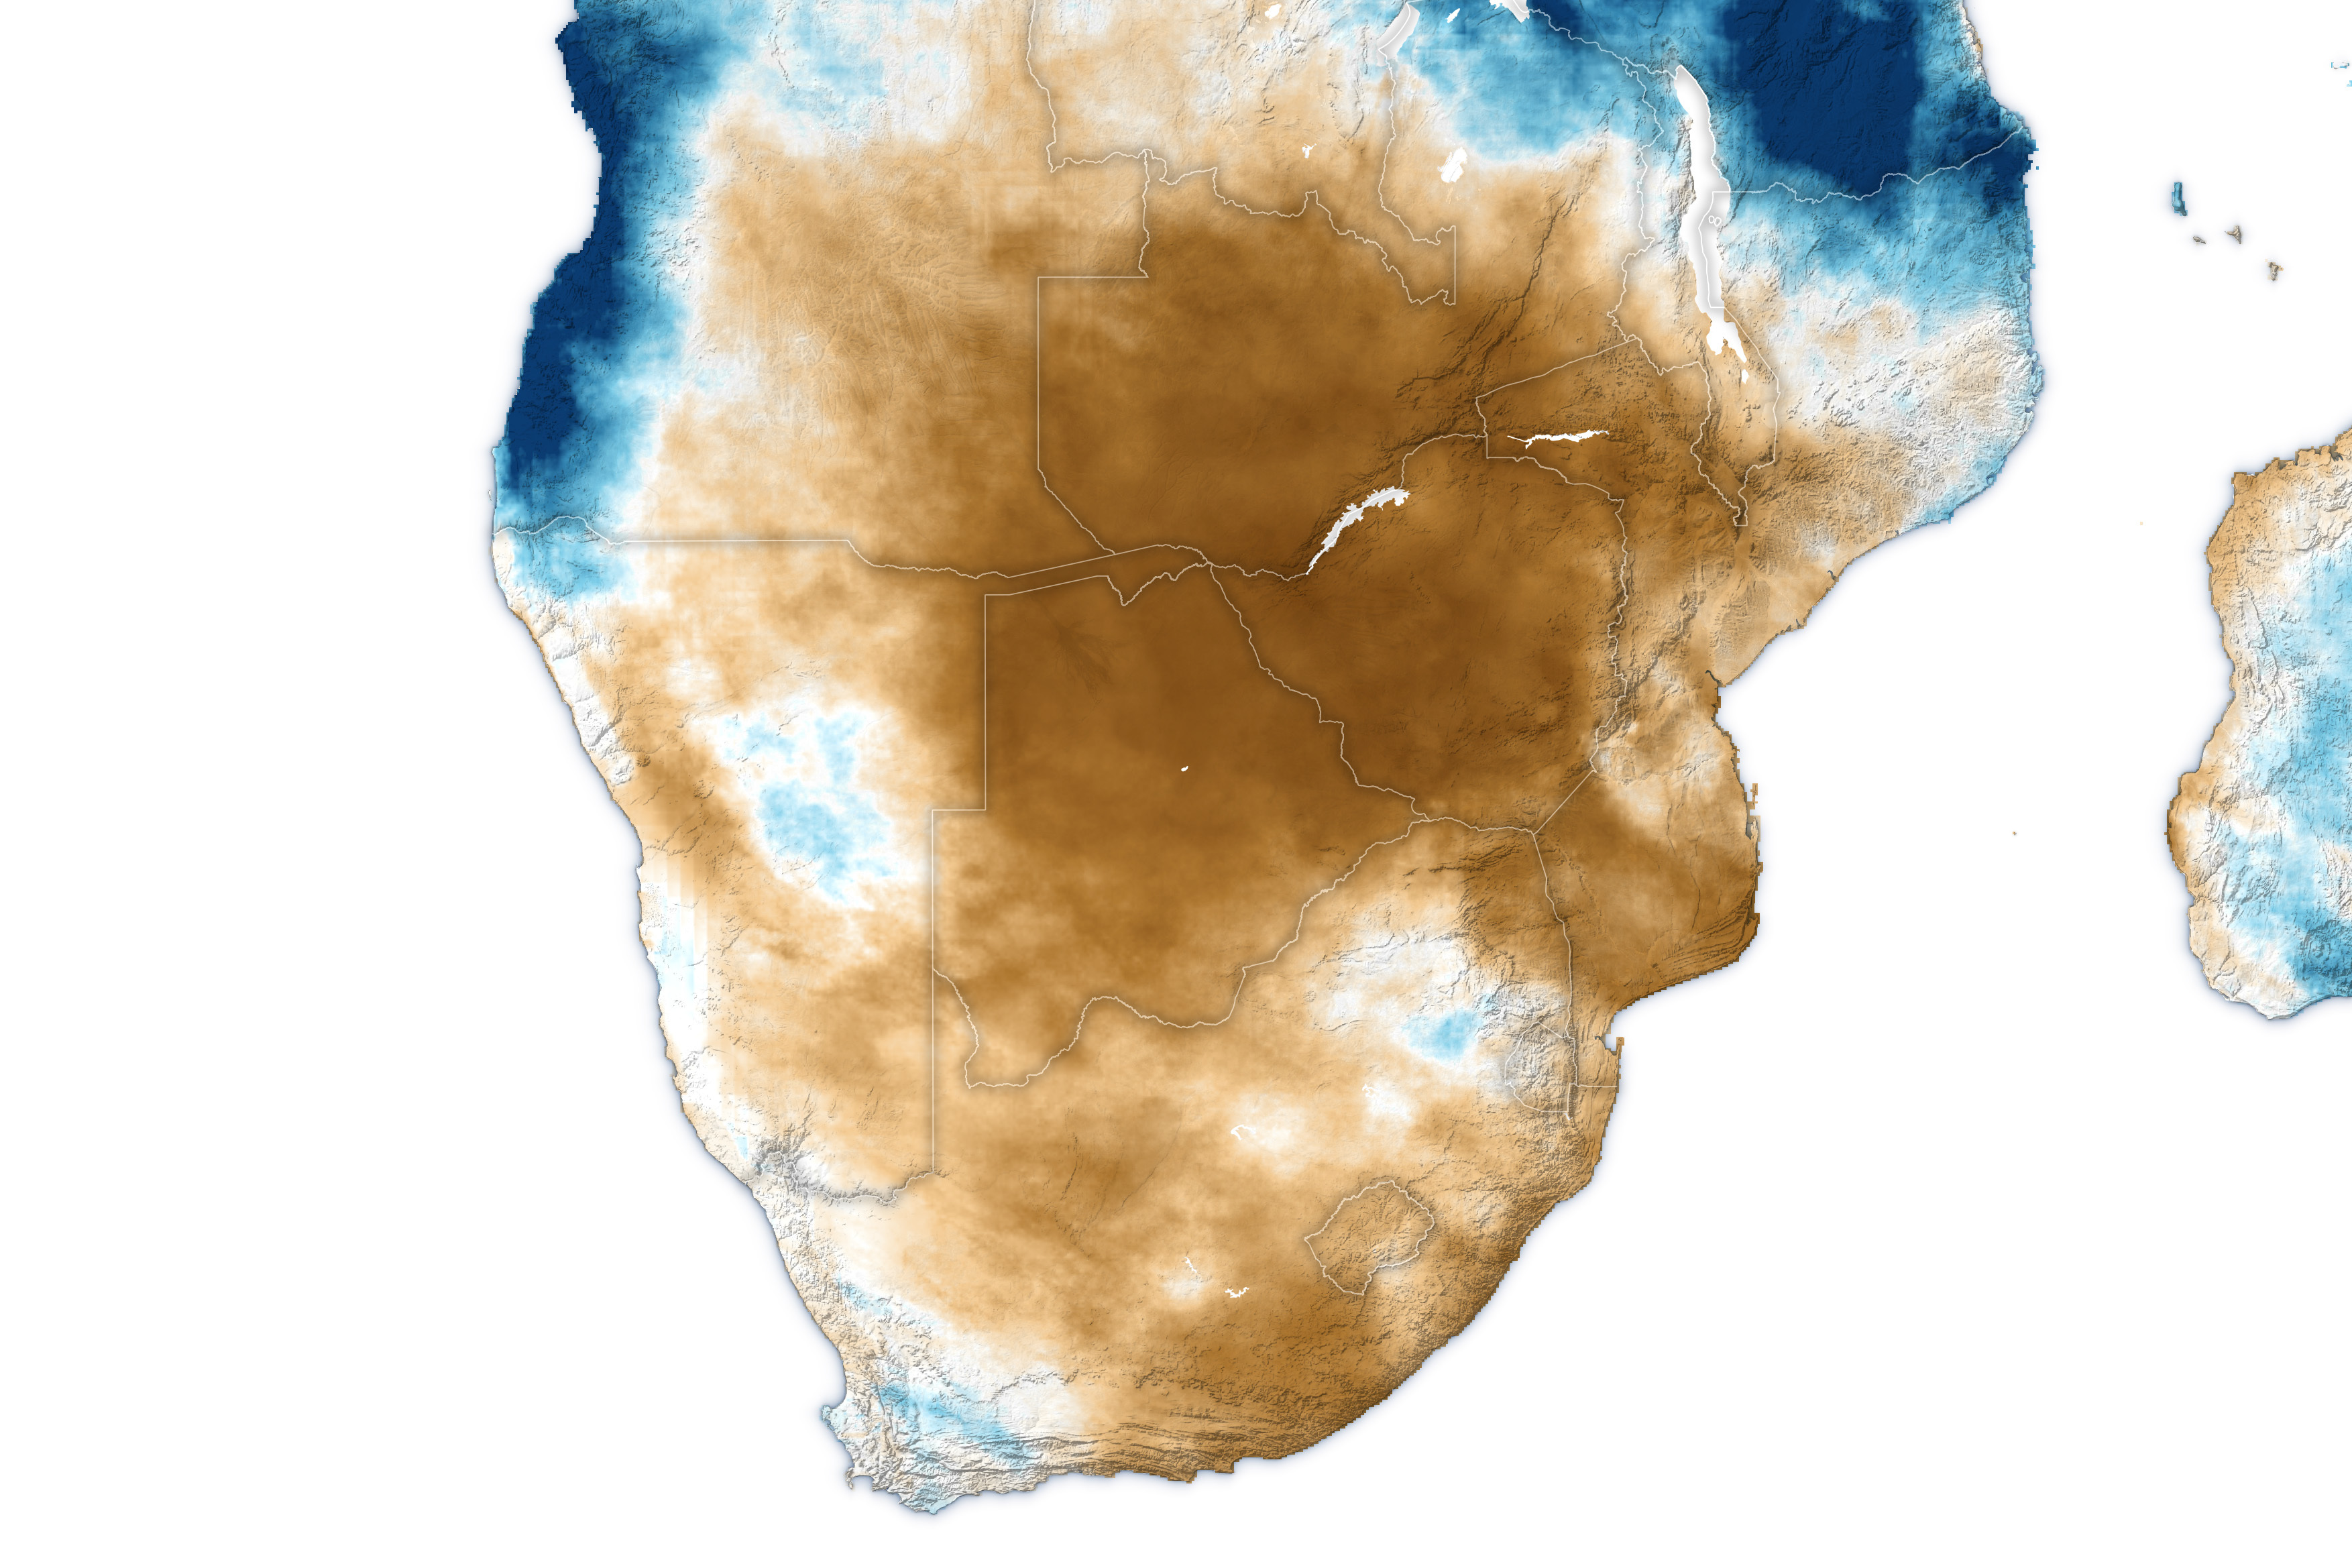 Map of Southern Africa with a blue to brown gradient overlay brown indicating below average rainfall and blue above. From the latitude of Zambia's Northern border South the trend is showing significant brown coloration, some quite dark, especially in the inland and more Eastern part of the continent.